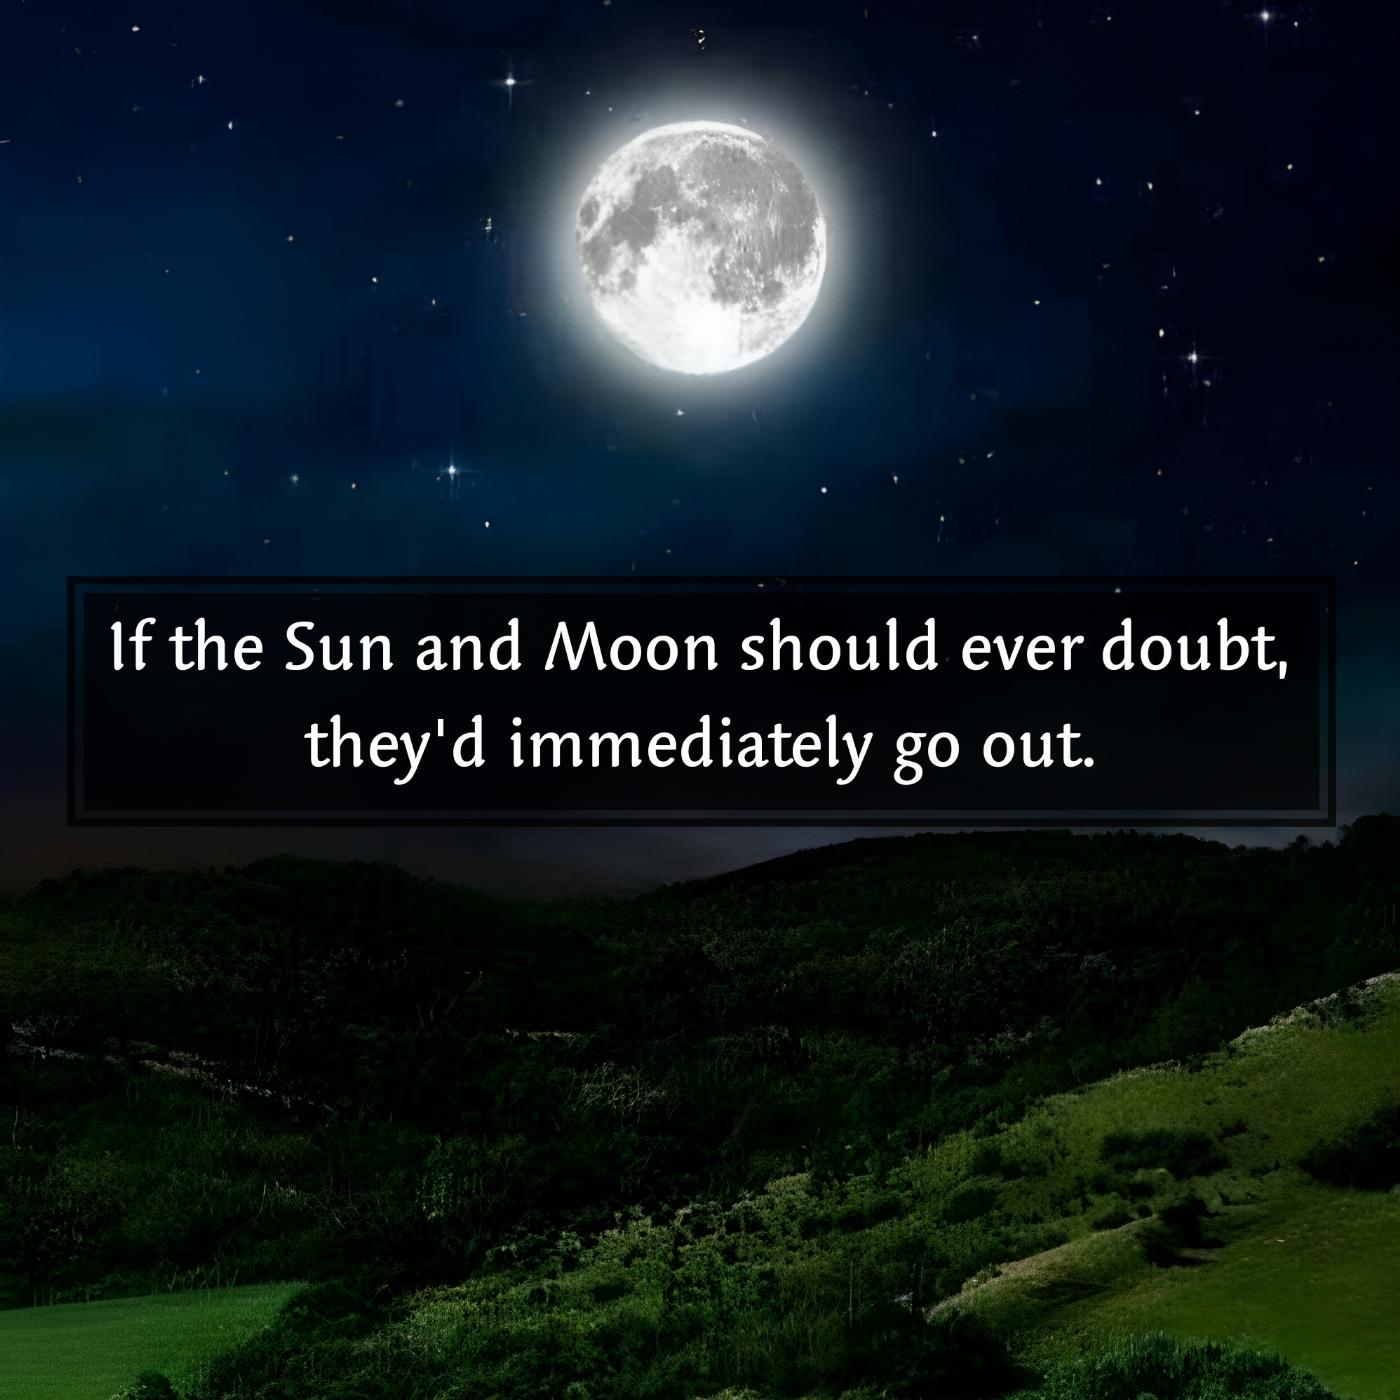  If the Sun and Moon should ever doubt